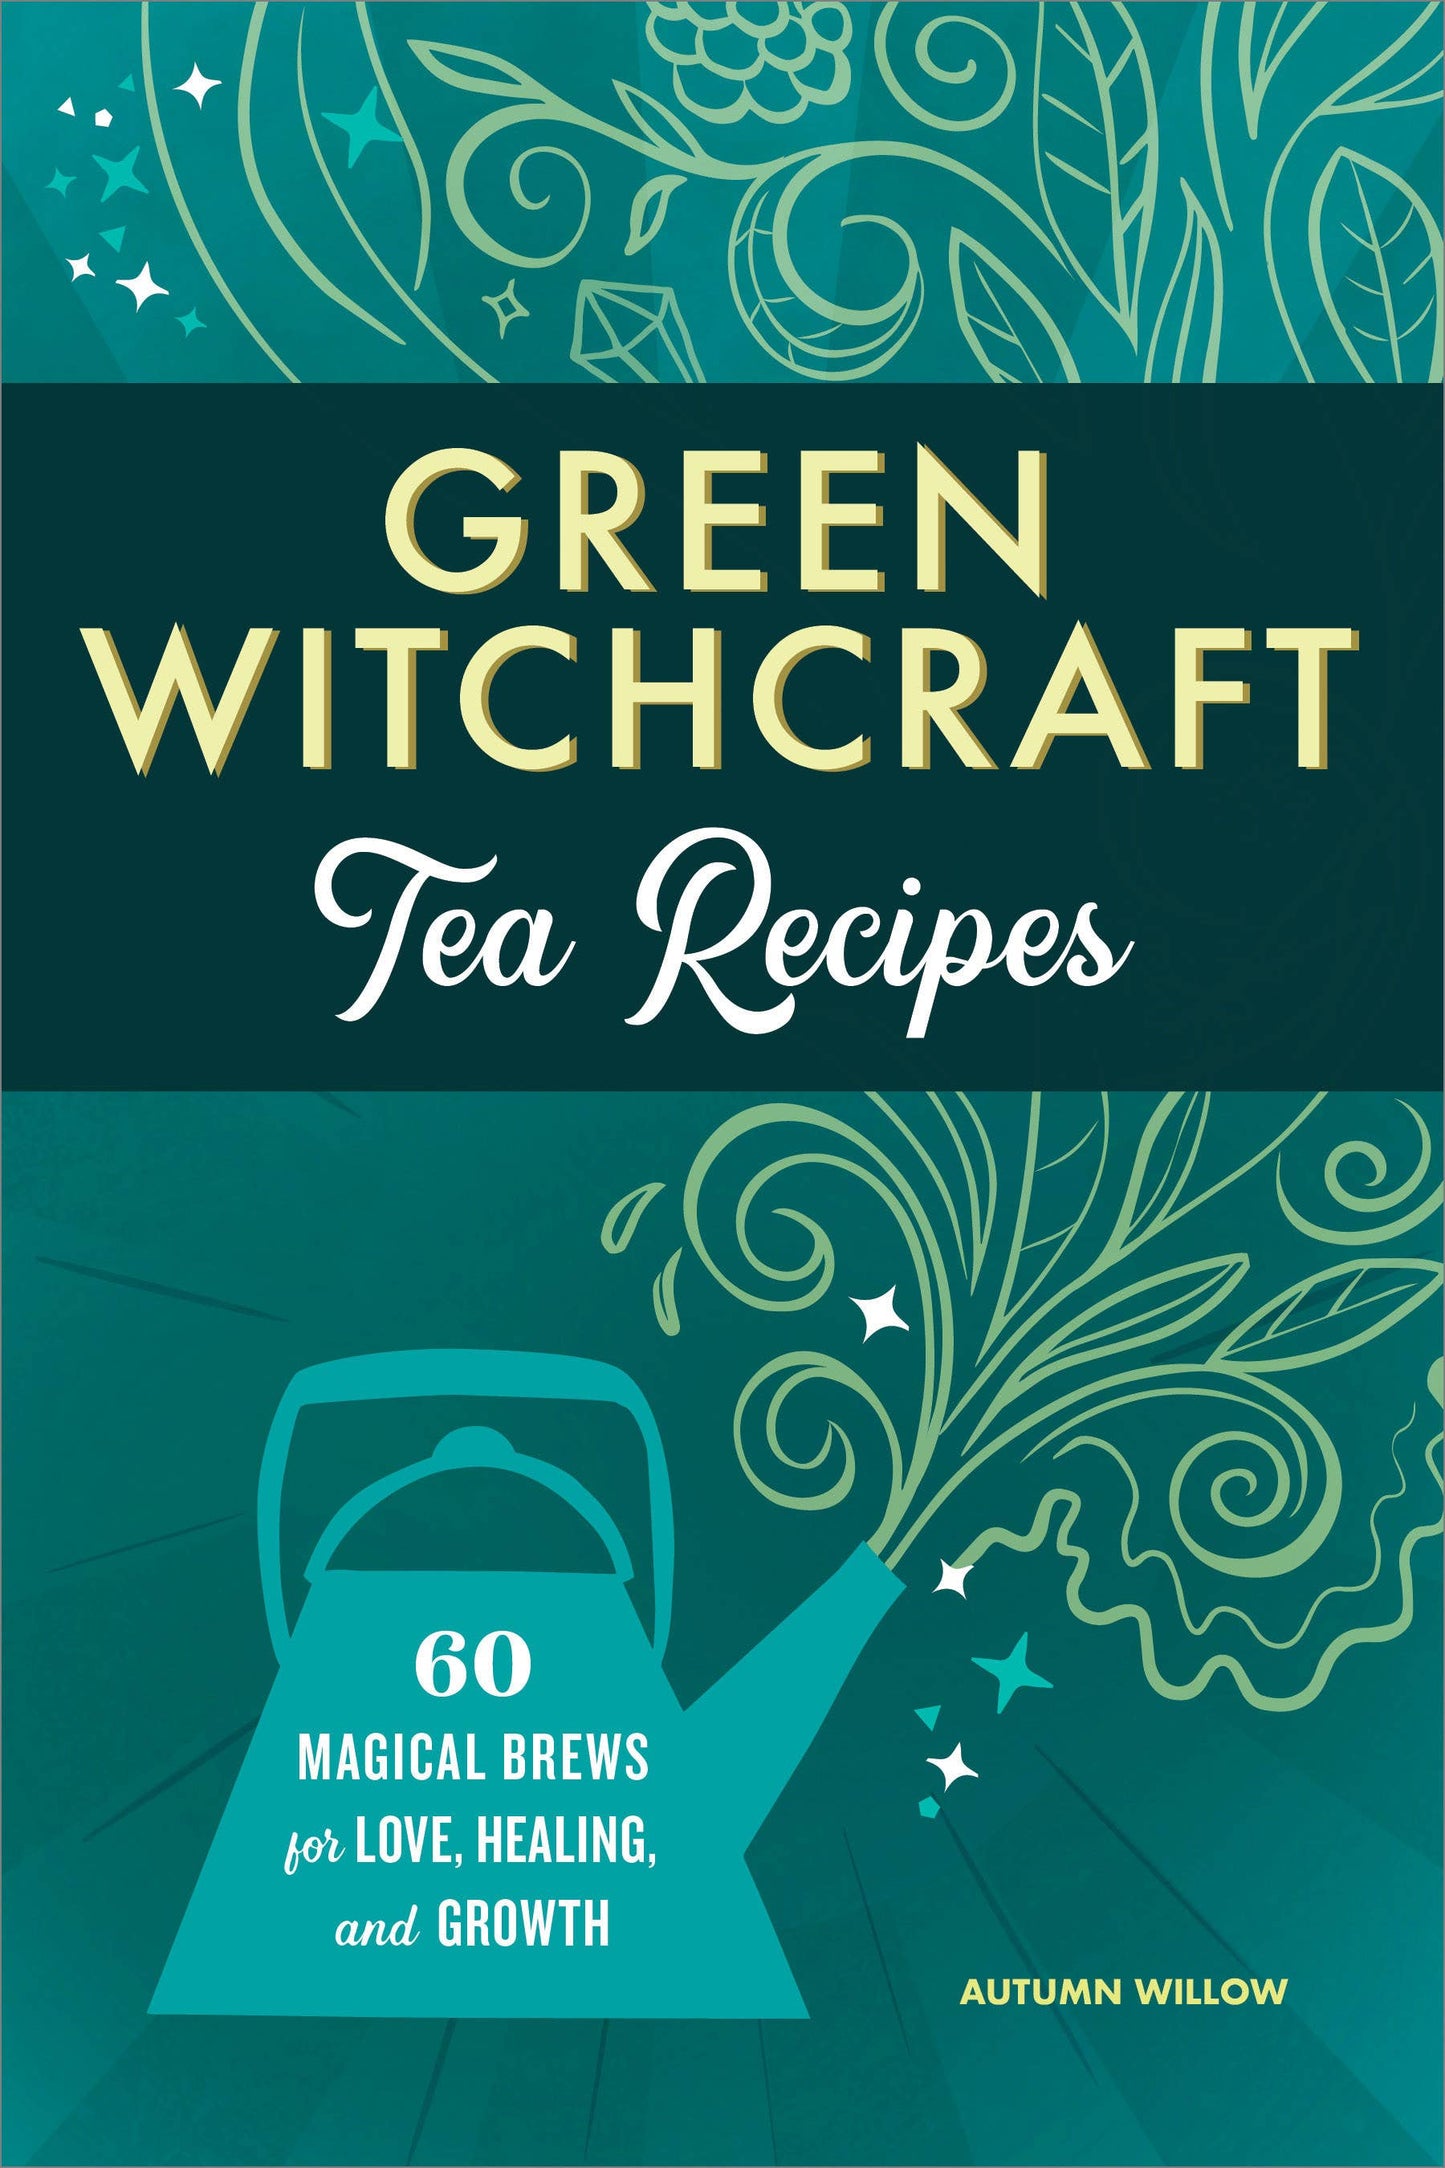 Green Witchcraft Tea Recipes